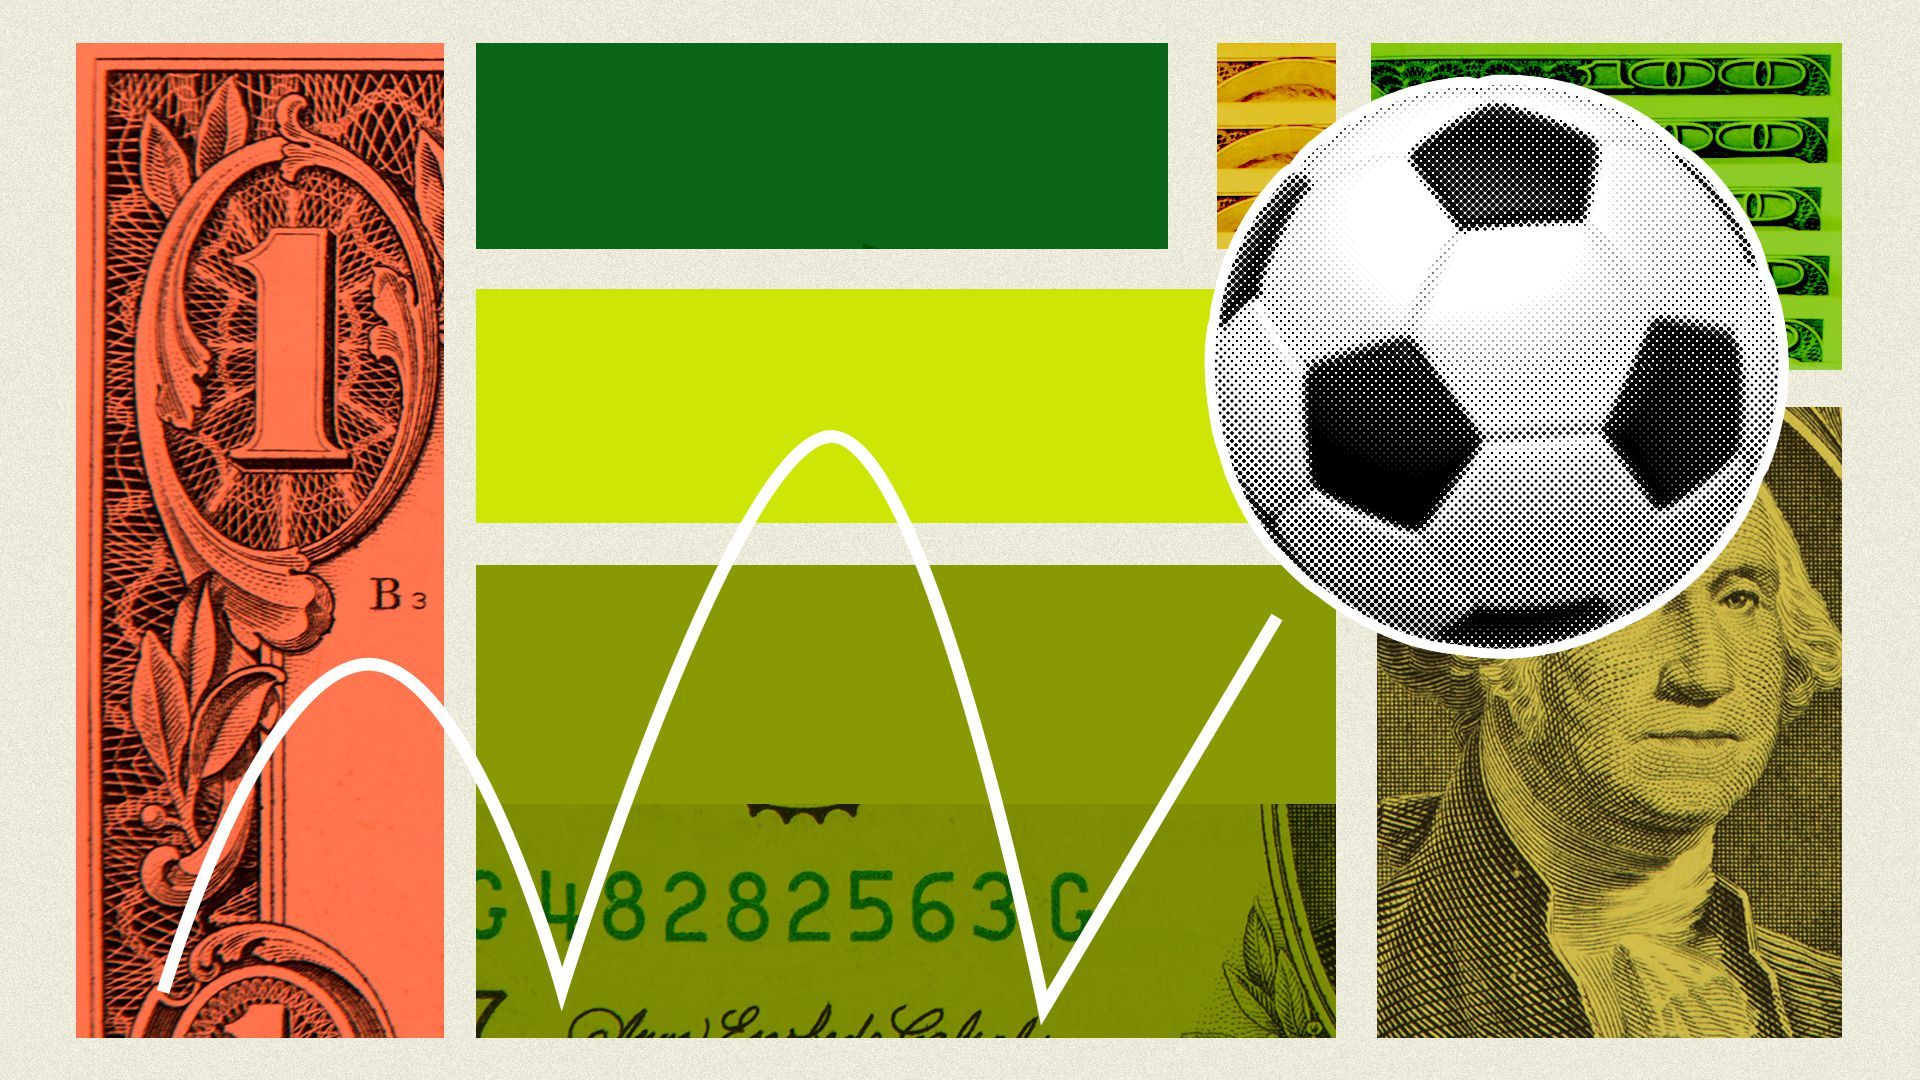 Illustrated collage of a bouncing soccer ball with money.